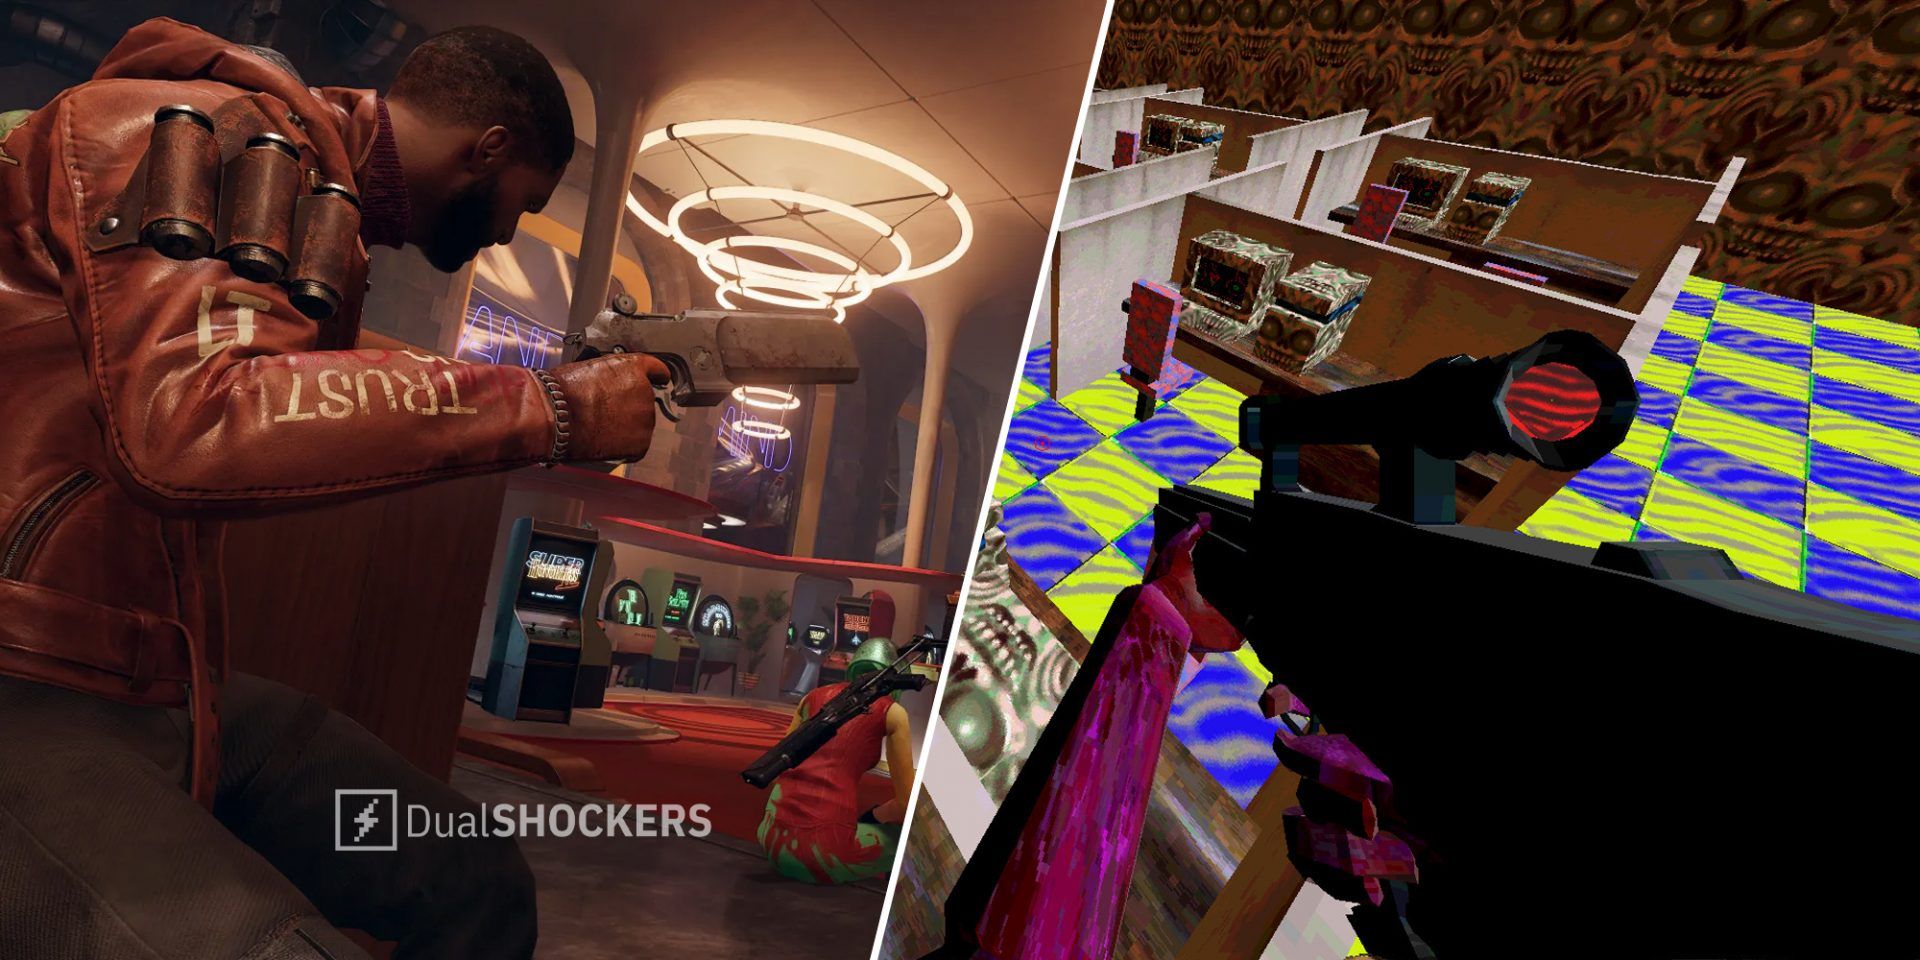 Deathloop Colt Vahn with gun in the arcade on left, Cruelty Sqaud first person view on right